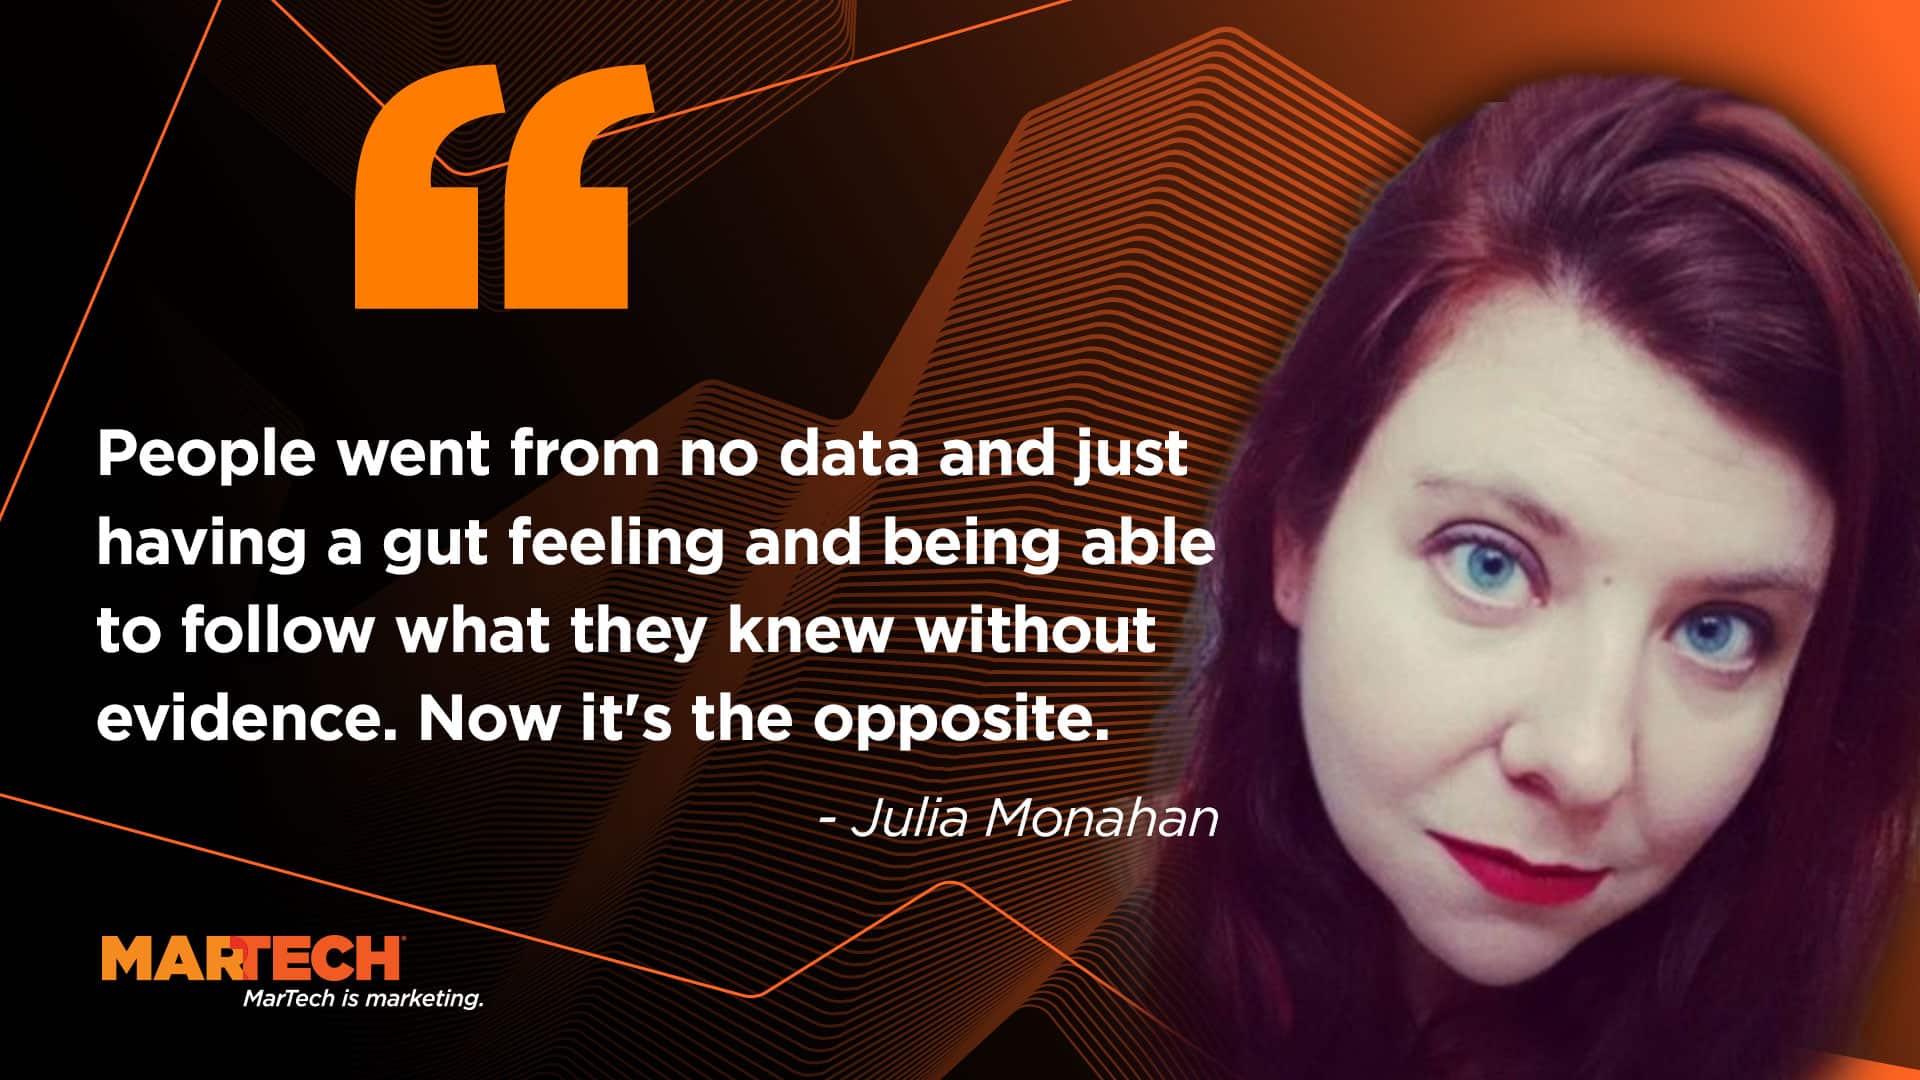 Julia Monahan gets the data to support the hunch